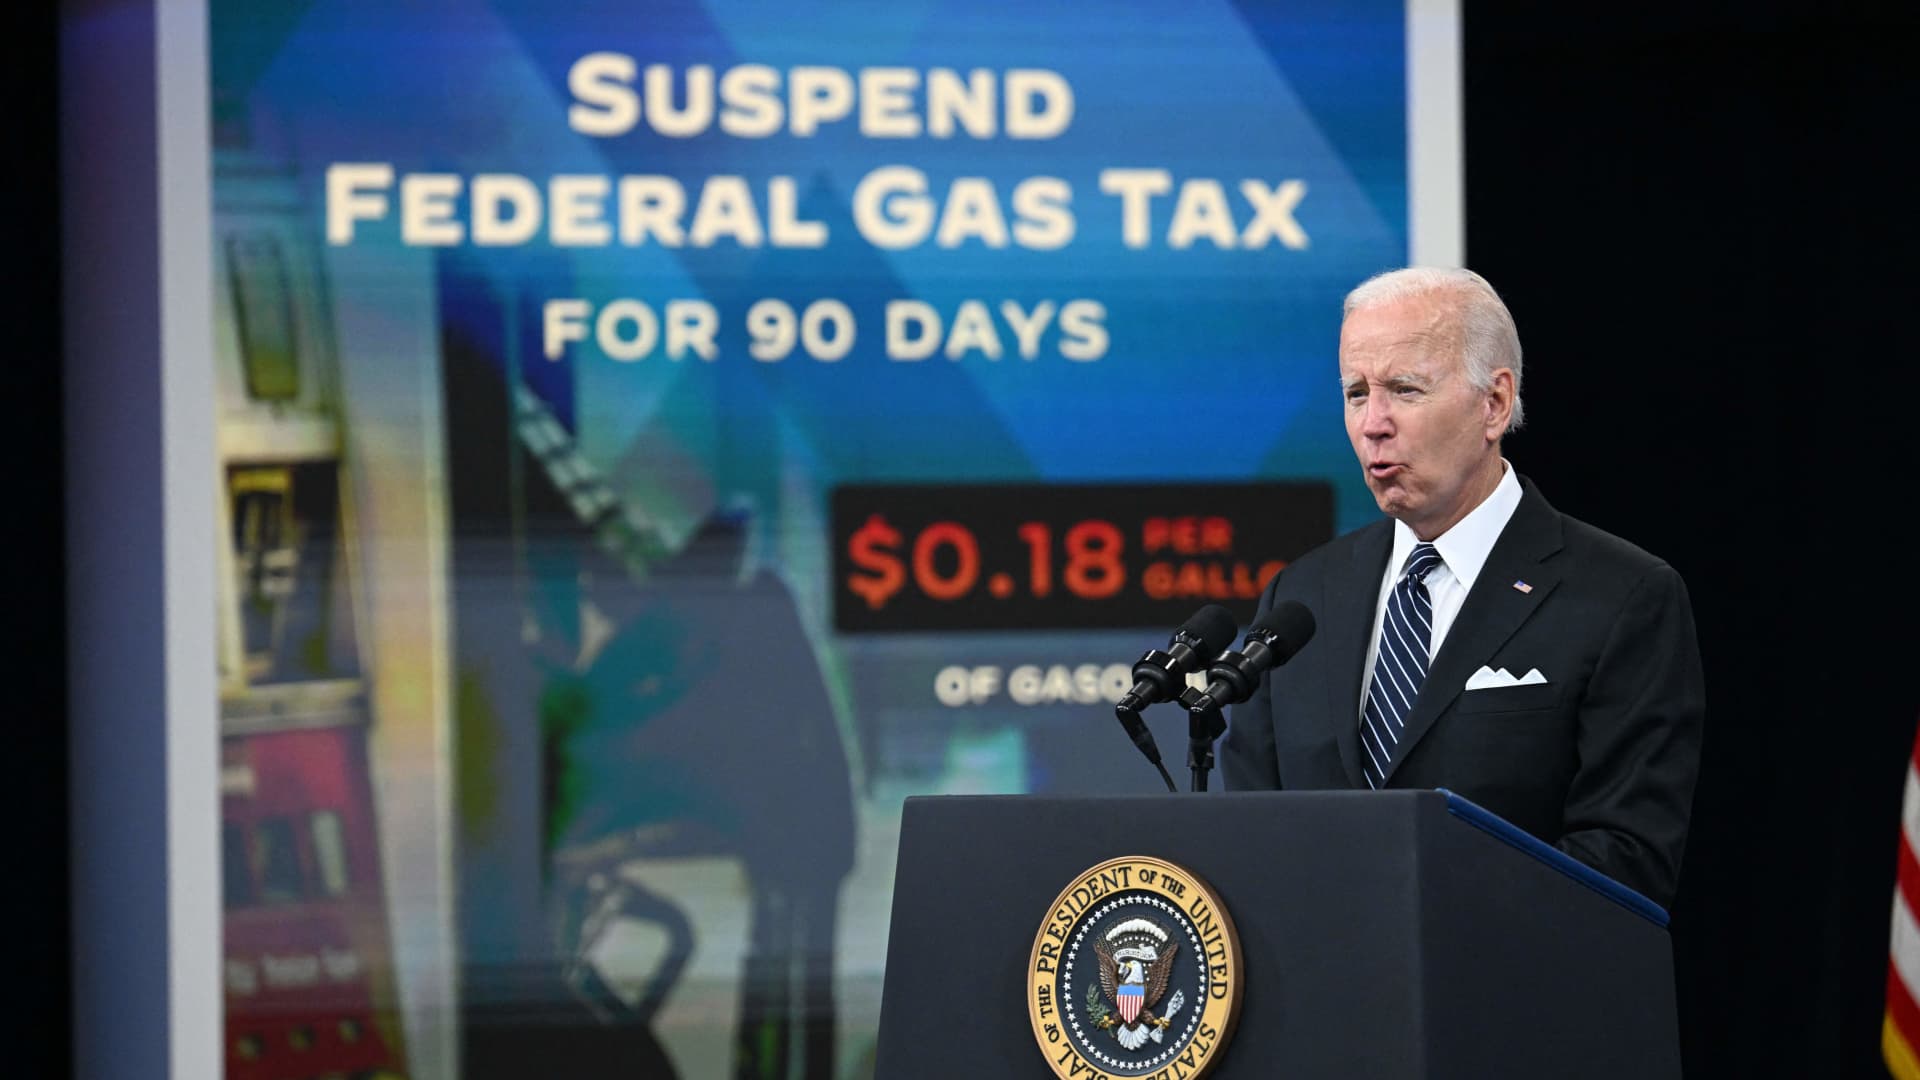 President Biden calls on Congress to suspend the federal gas tax for 90 days